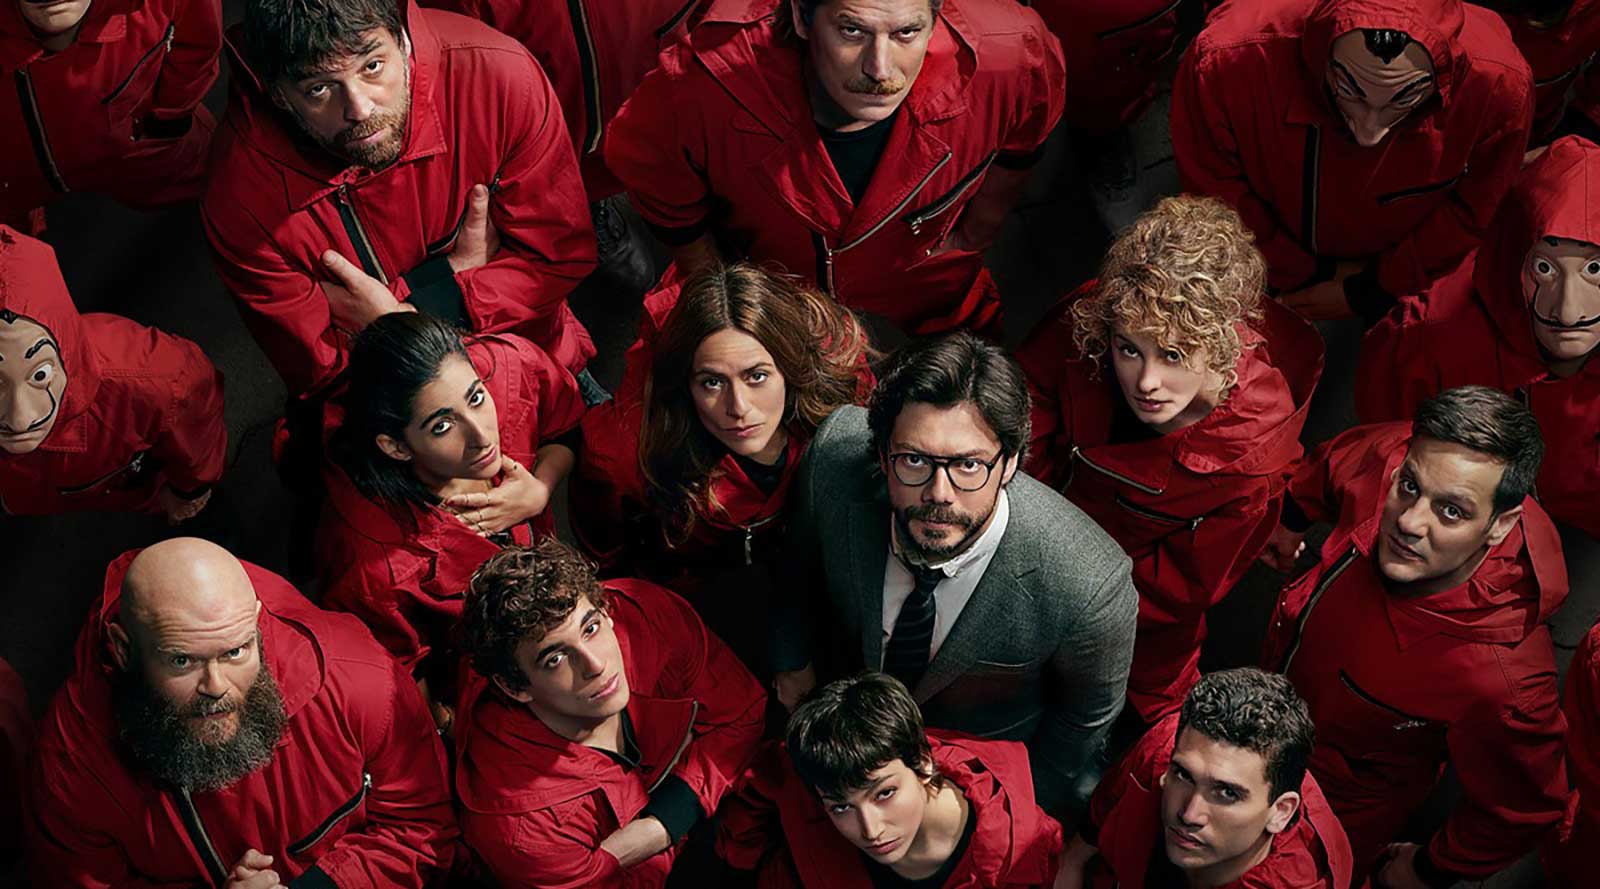 'Money Heist' was at the top of its game when Netflix took over the show for season 3. But it's clear that this show no longer is about a heist anymore. 